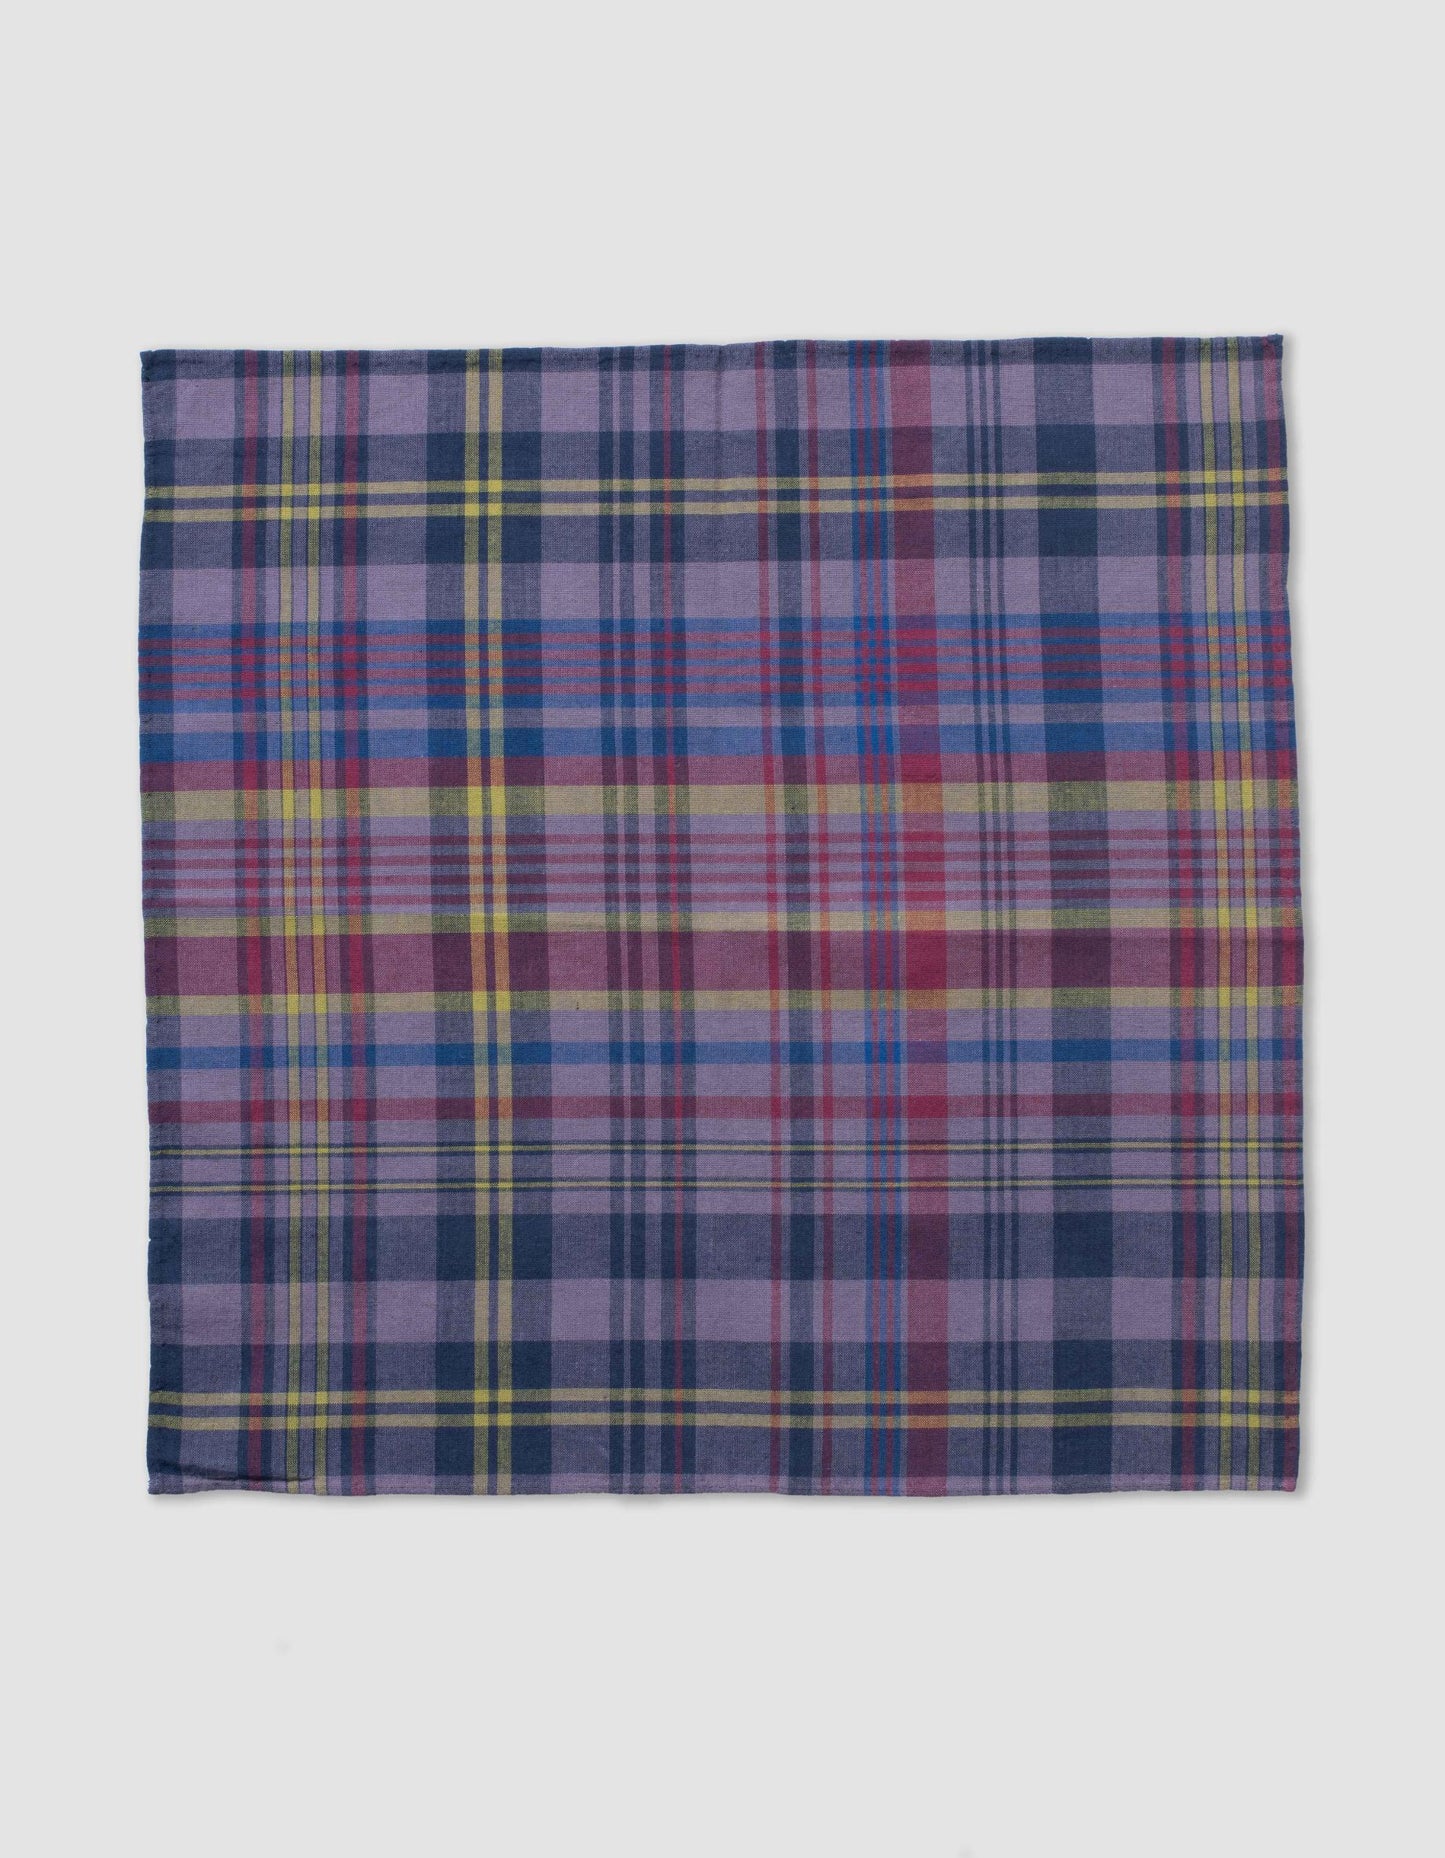 MADRAS POCKET SQUARE - TEA STAINED